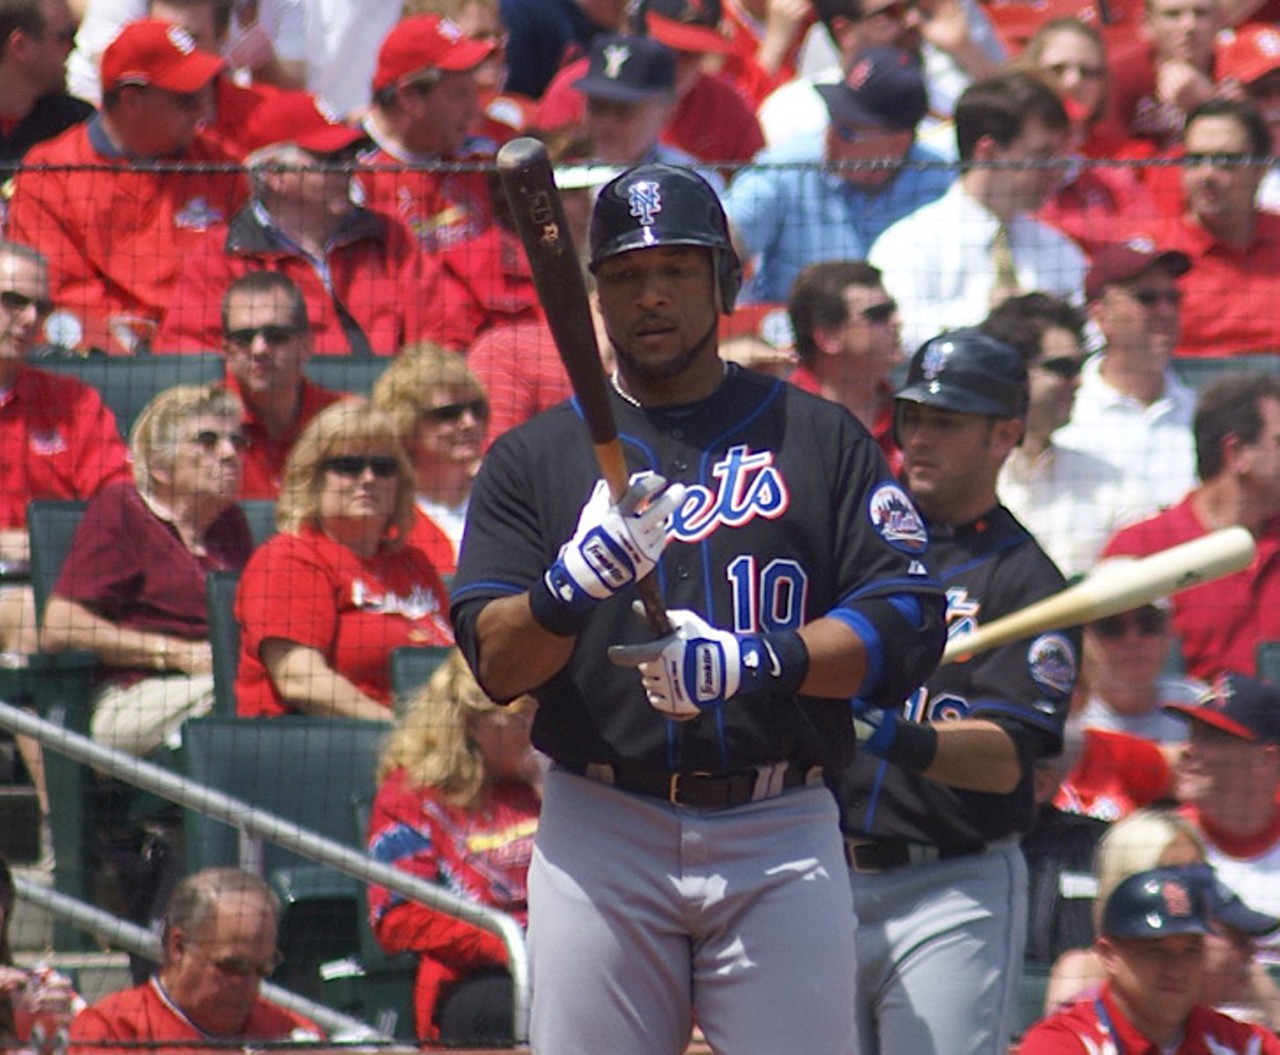 Gary Shefflied
That dude with the crazy batting stance, Gary Sheffield, was an alumnus of Hillsborough High. There was recently a viral video of the slugger hitting bombs while casually smoking a cigar with his son throwing batting practice. Pretty dope. 
Photo by UCinterntational via Wikimedia Commons